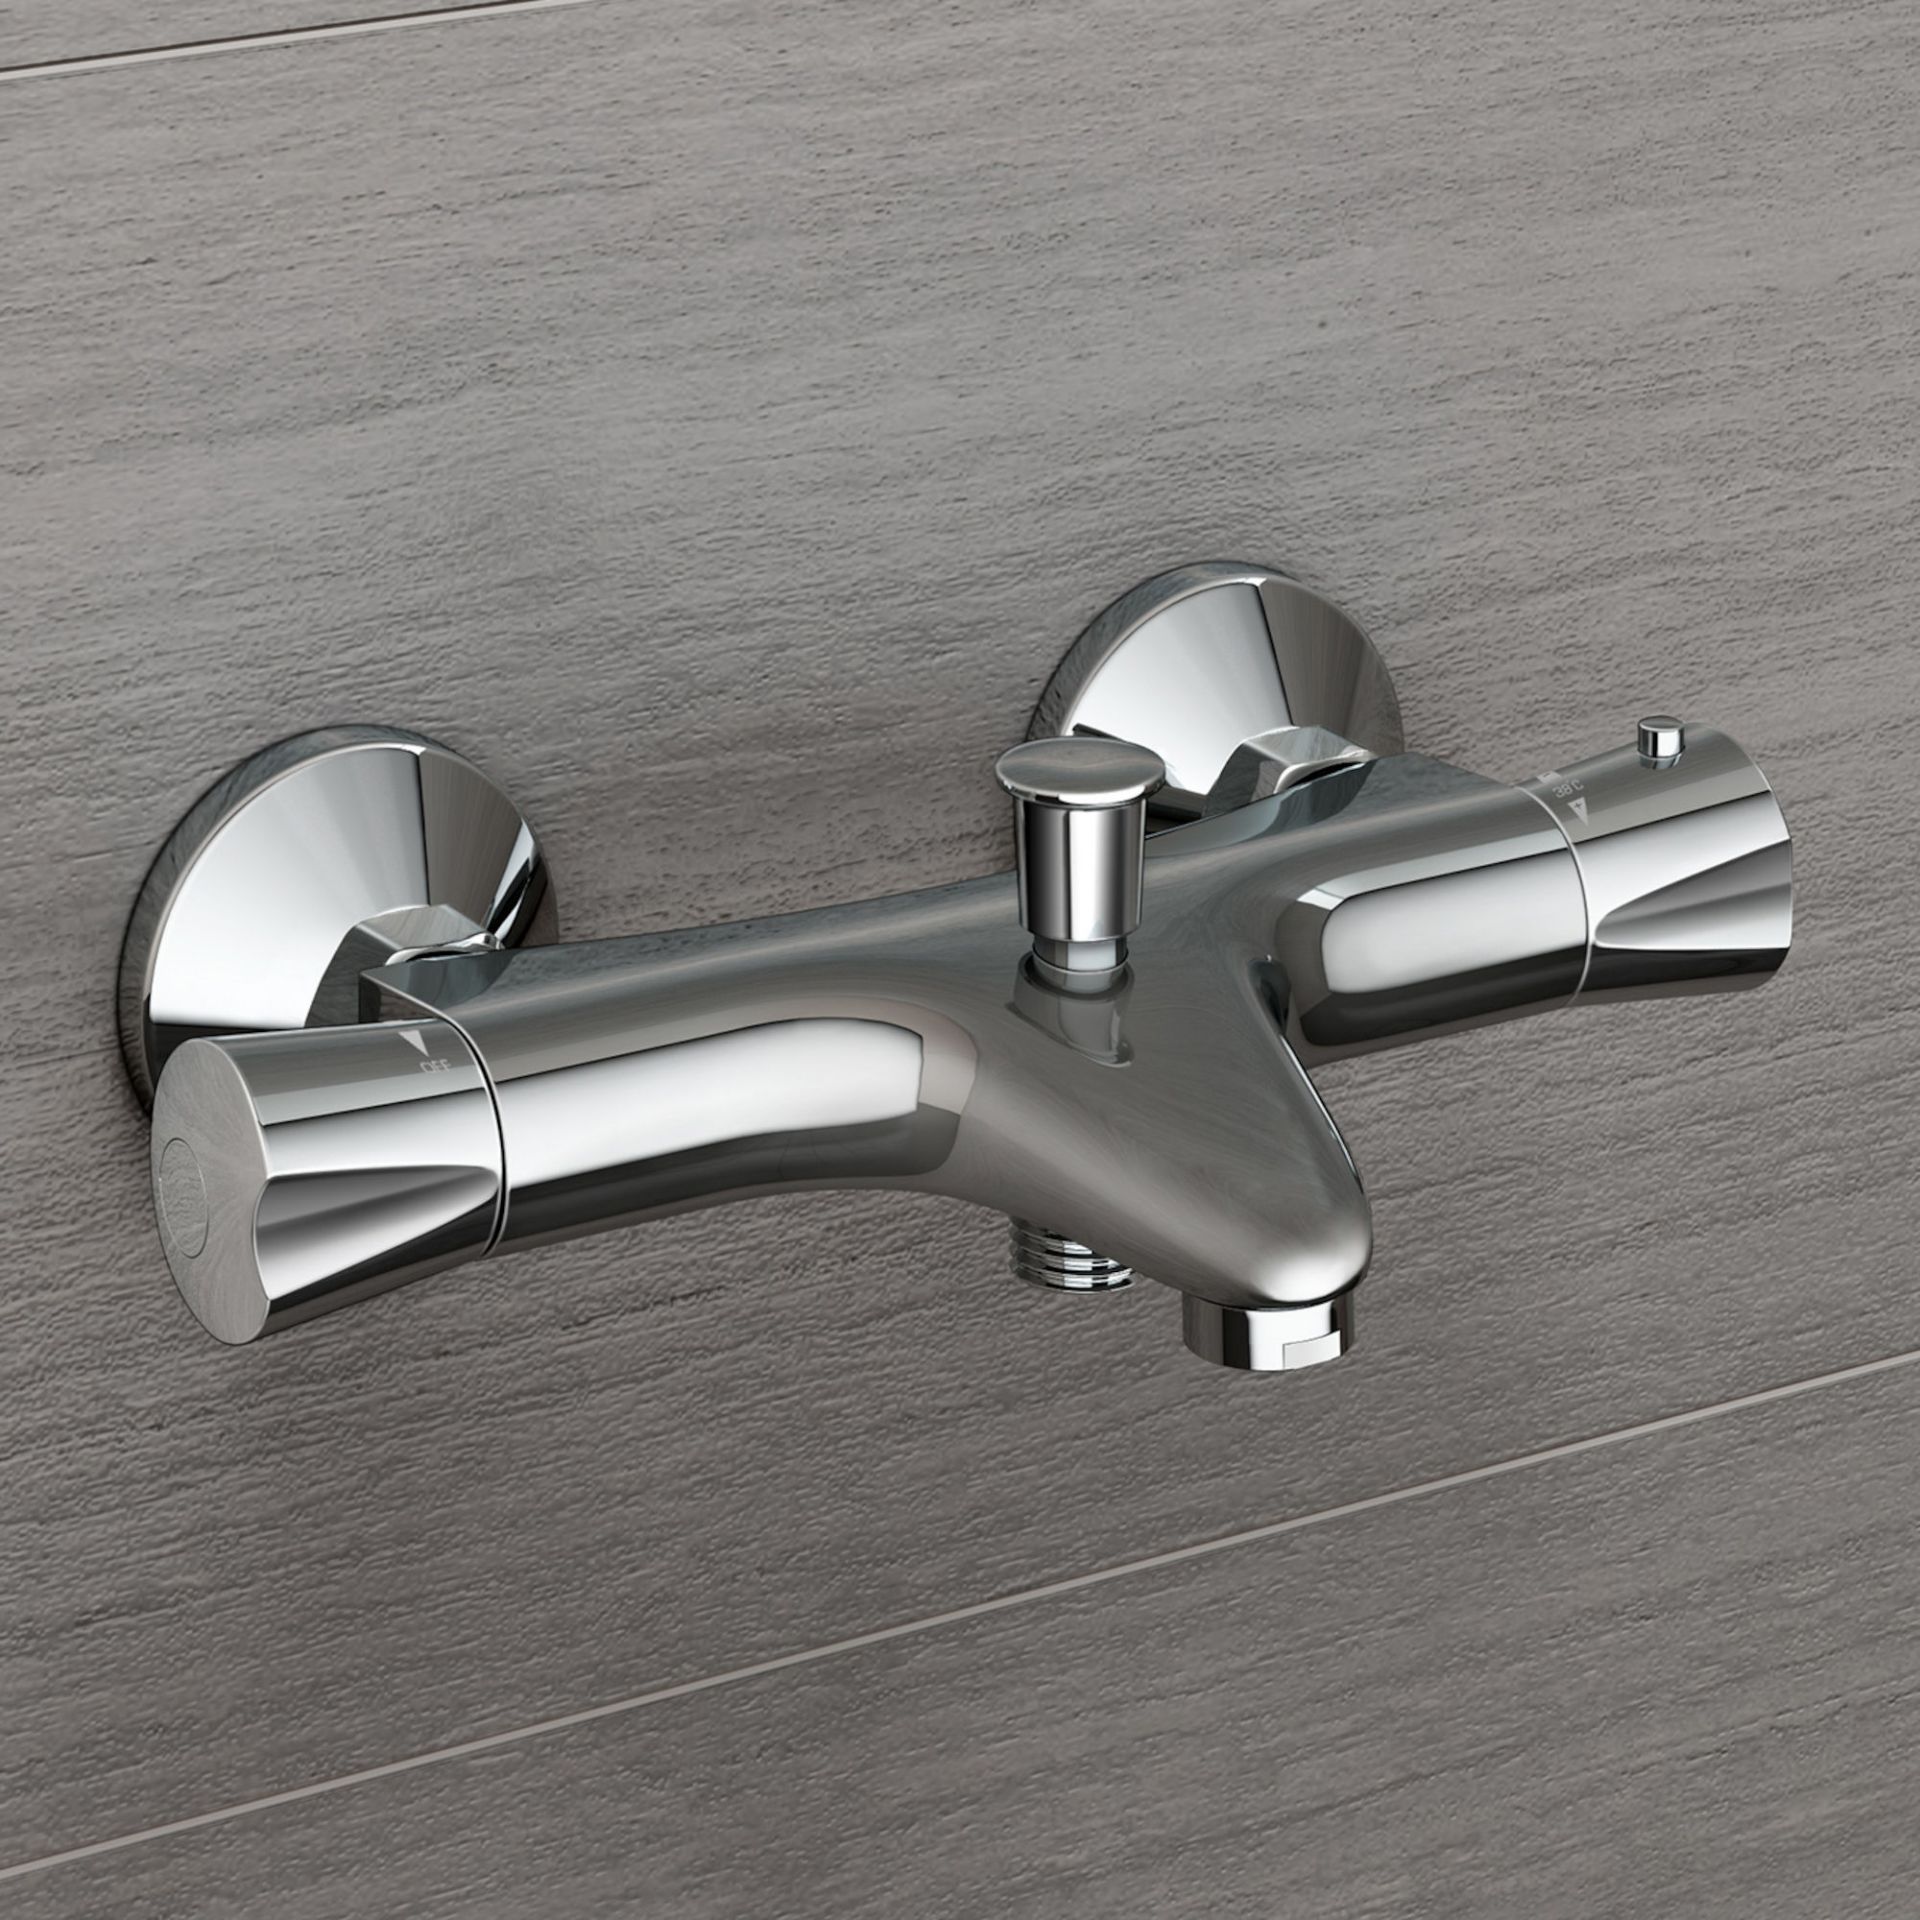 (E96) Shower Mixer Valve with Bath Filler Chrome Plated Solid Brass Mixer Thermostatic mixer